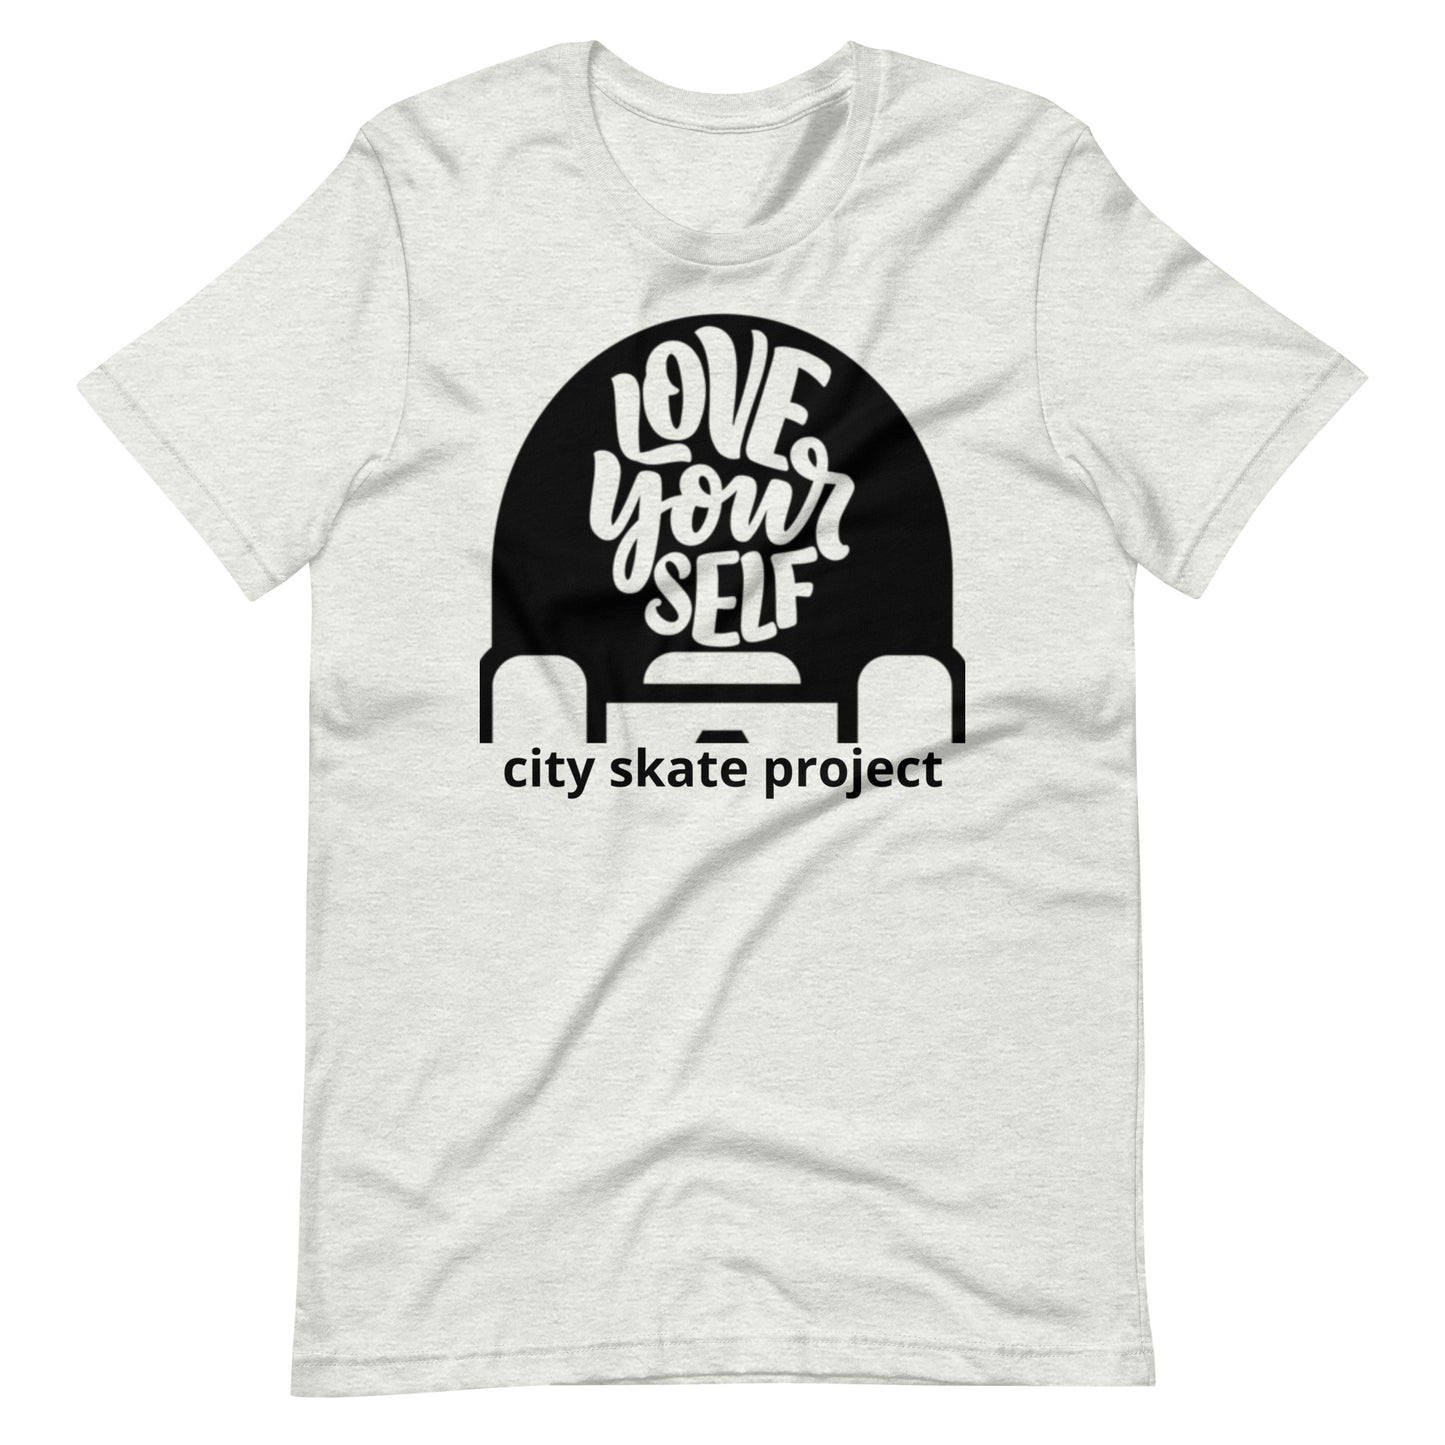 City Skate Project "Love Yourself" Unisex t-shirt